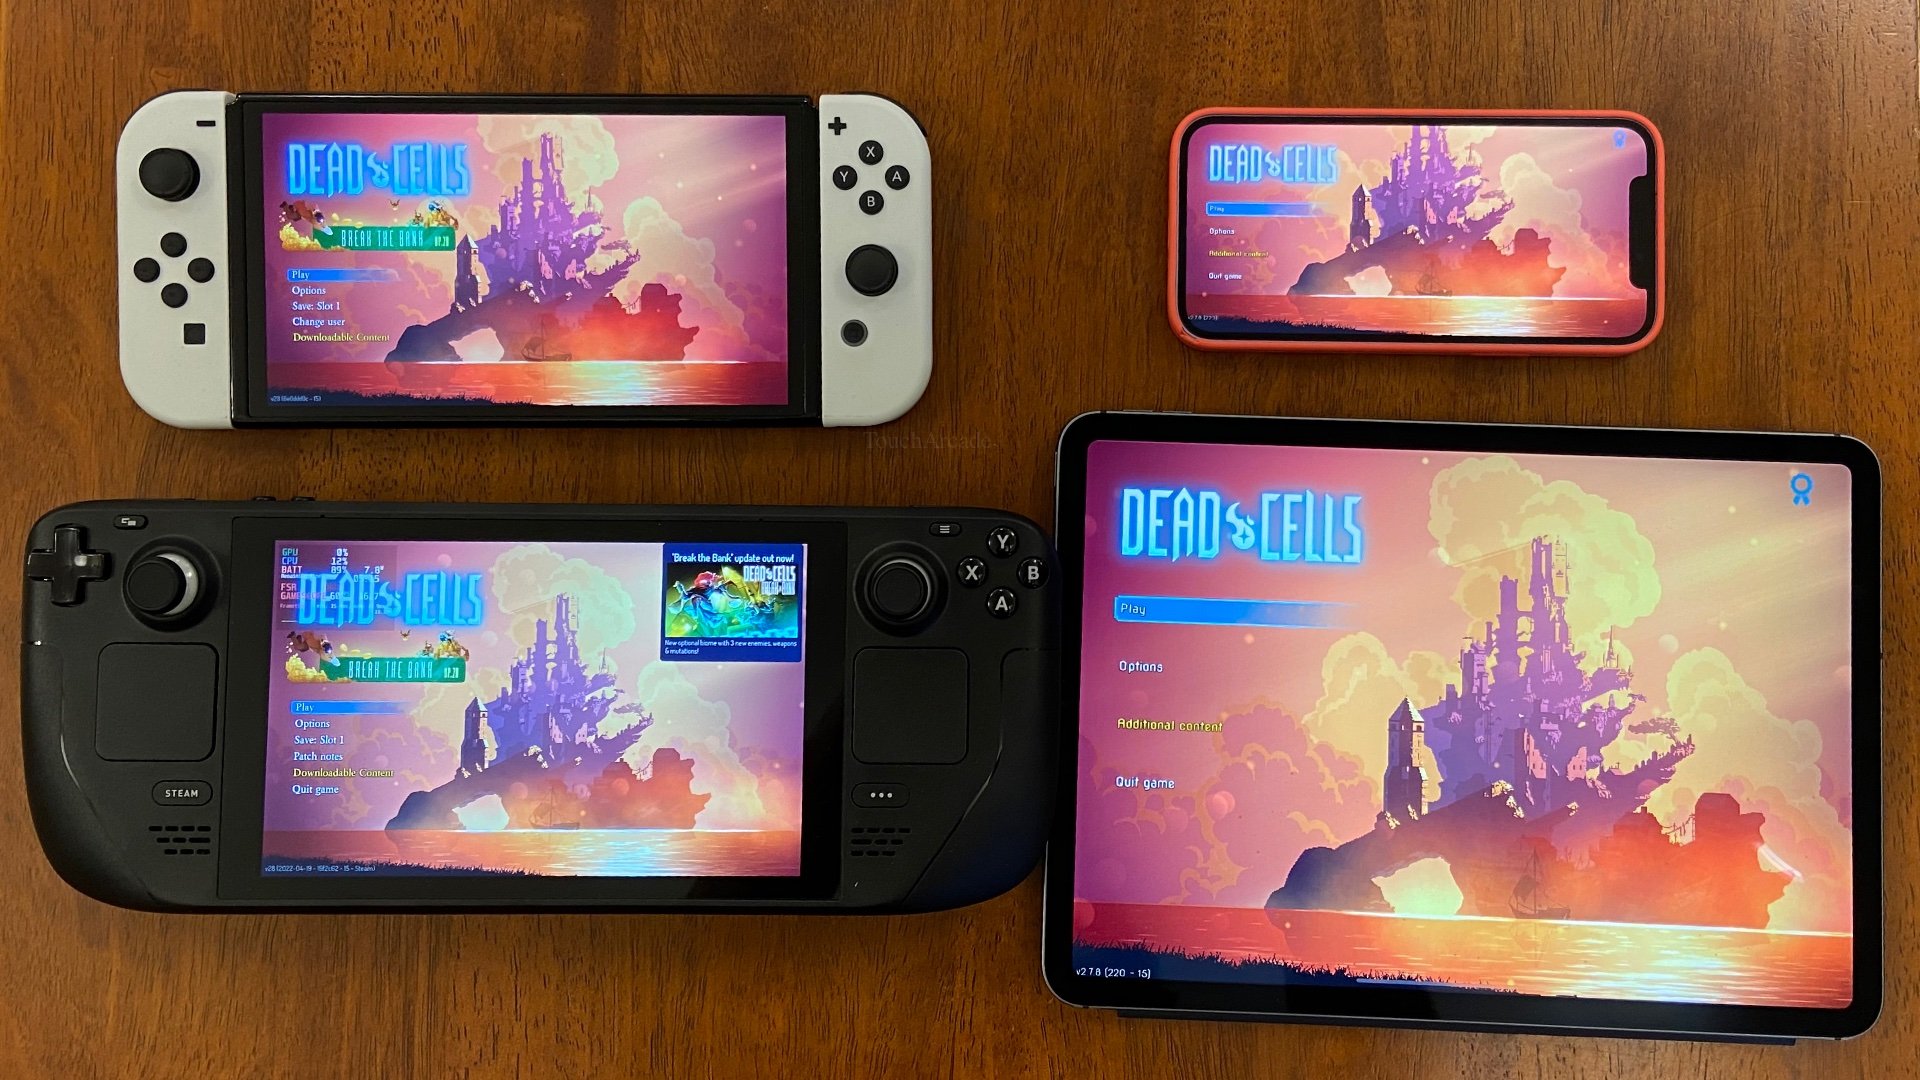 Stardew Valley' iOS vs Nintendo Switch – What Platform Should You Buy it  On? – TouchArcade